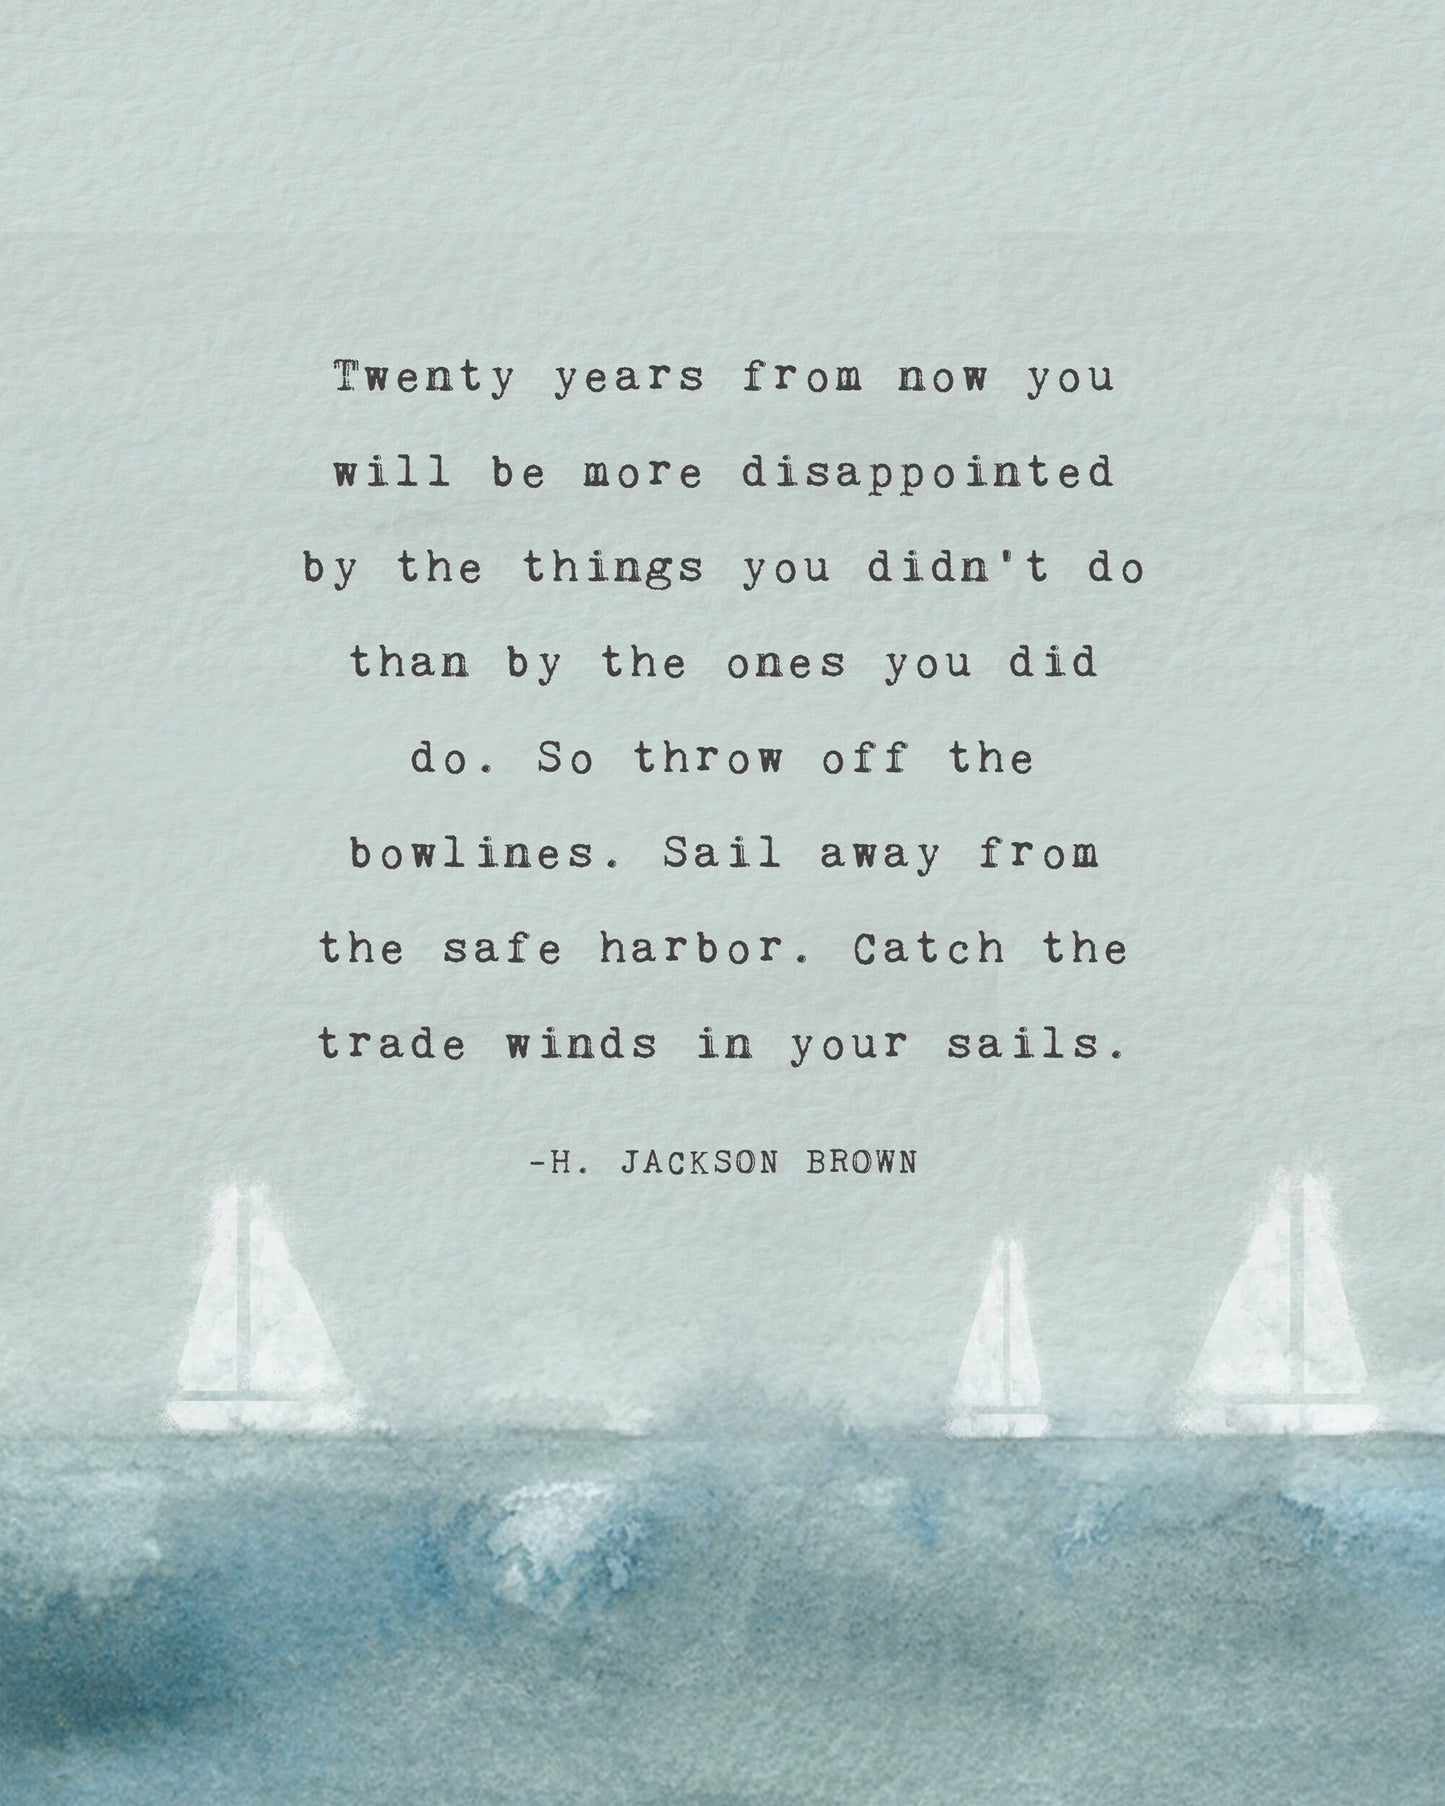 H. Jackson Brown quote art "Twenty years from now you will be more disappointed by the things you didn't do..."